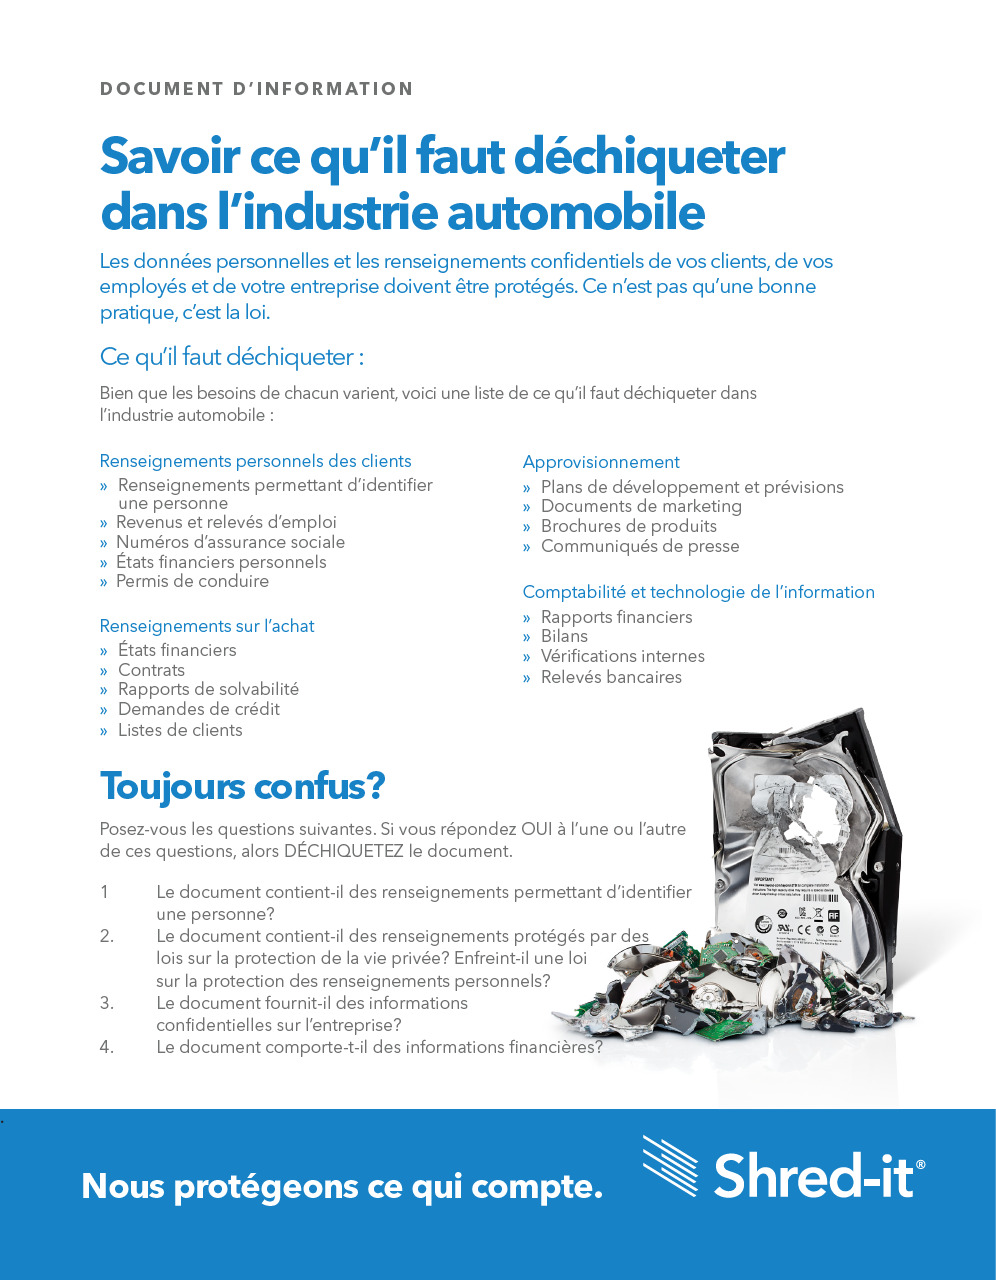 Shred-it-Knowing-What-to-Shred-Auto-French_1.pdf